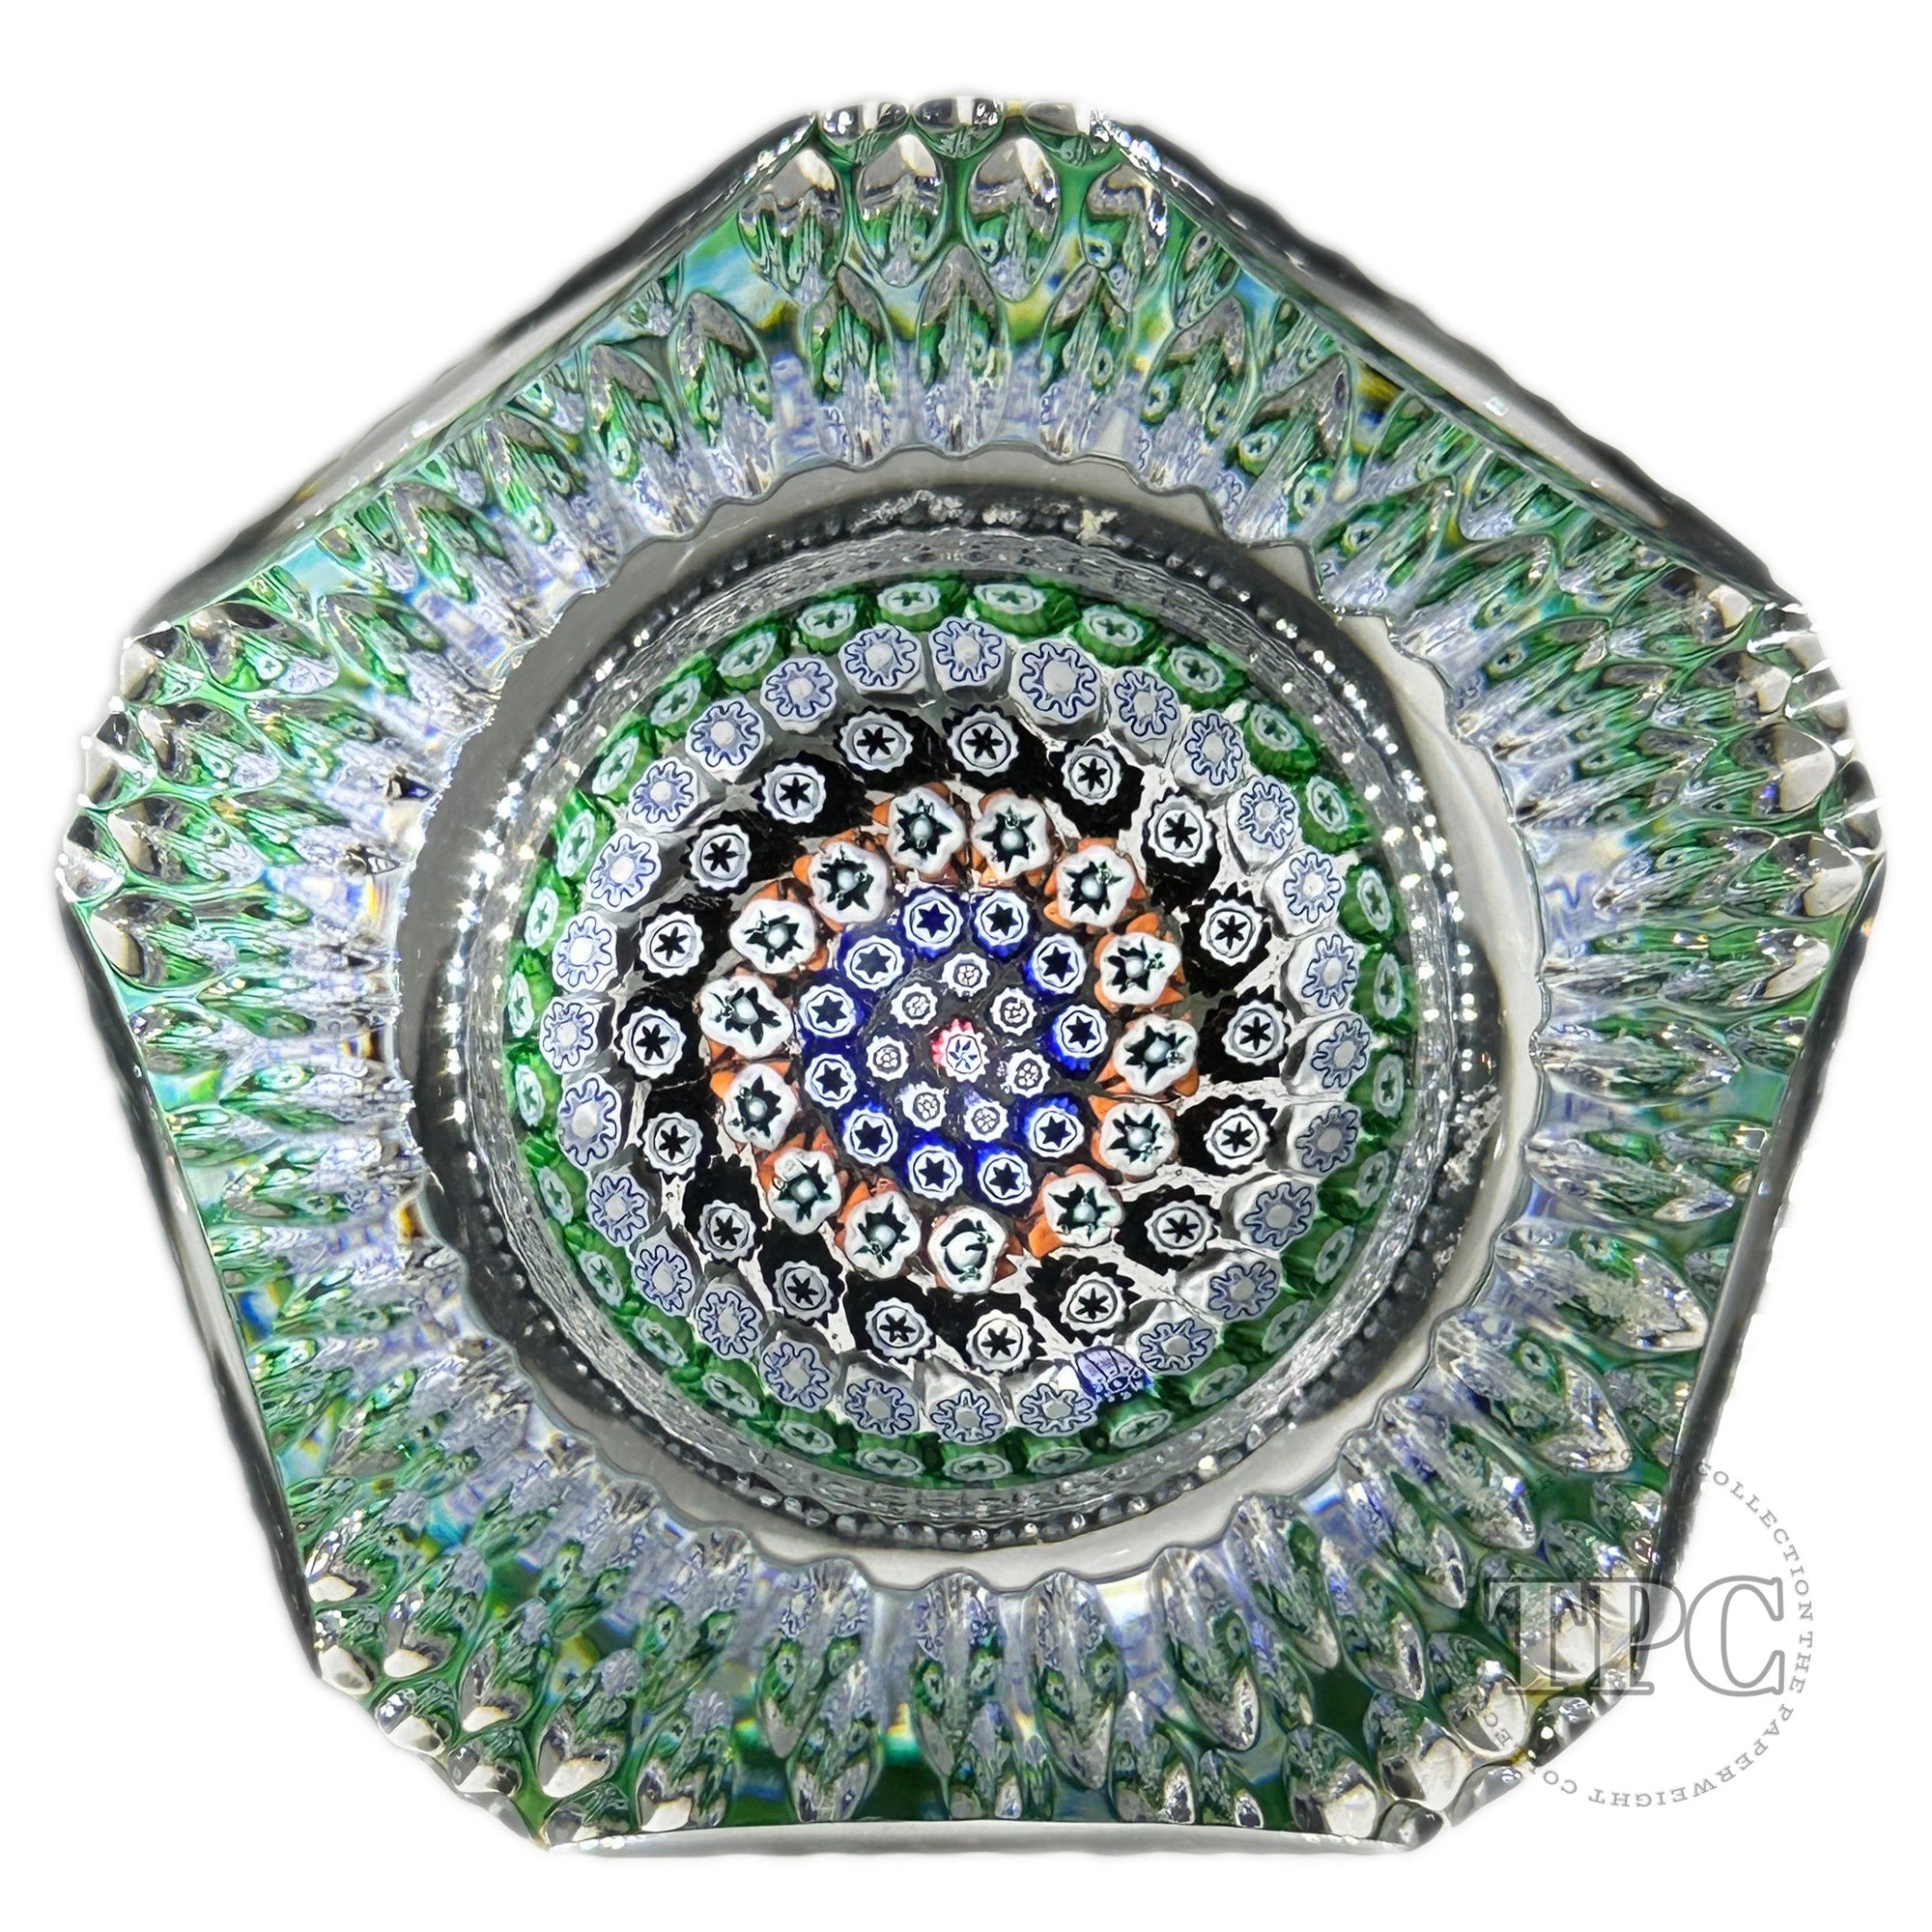 Whitefriars 1974 Glass Art Paperweight Colorful Concentric Millefiori with Toothpick Faceting